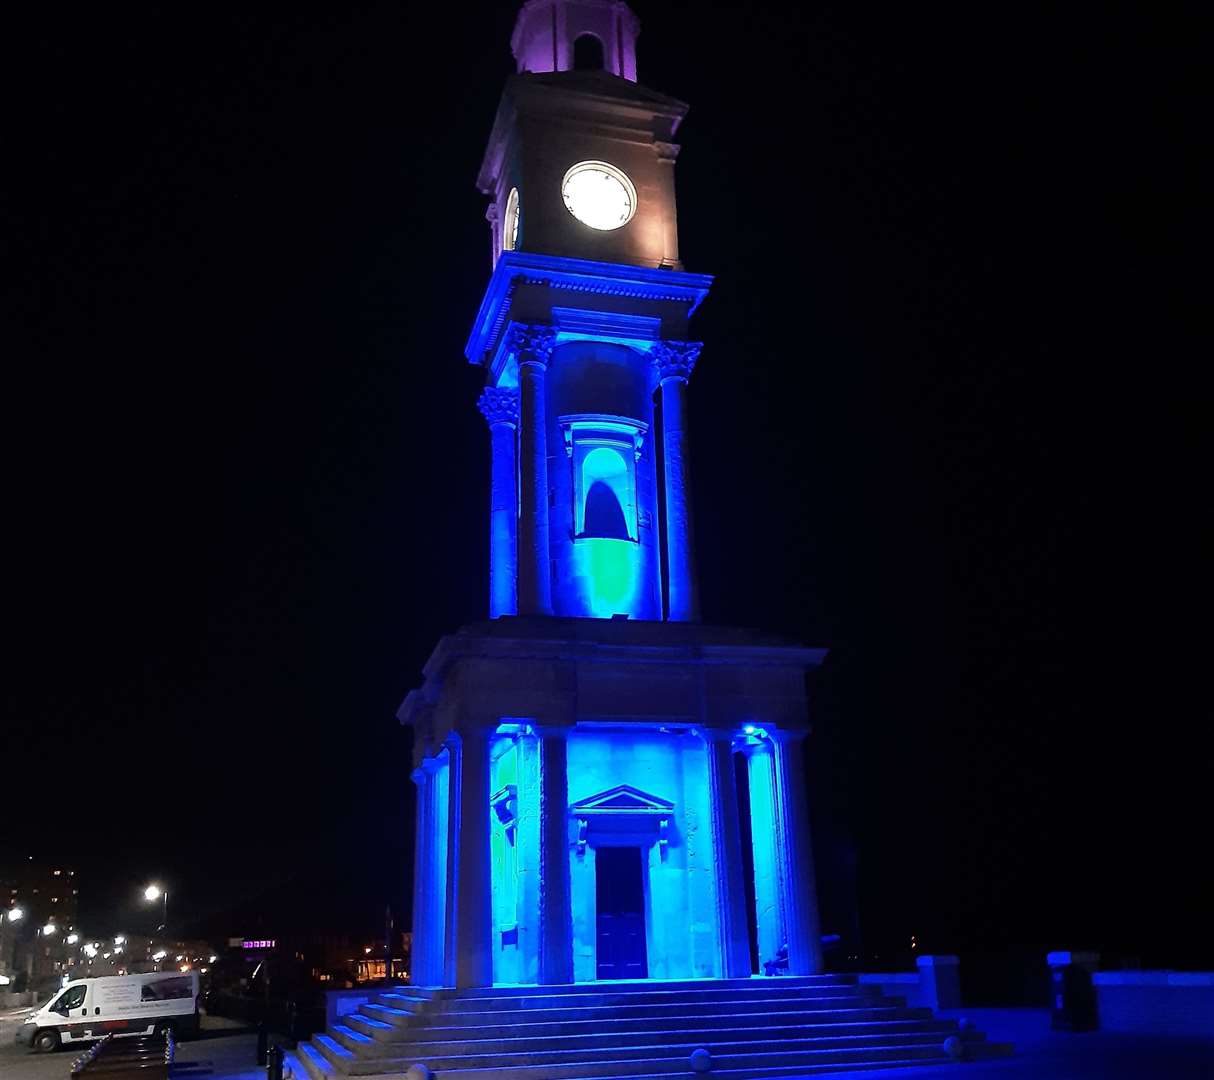 The Herne Bay clock tower previously lit up